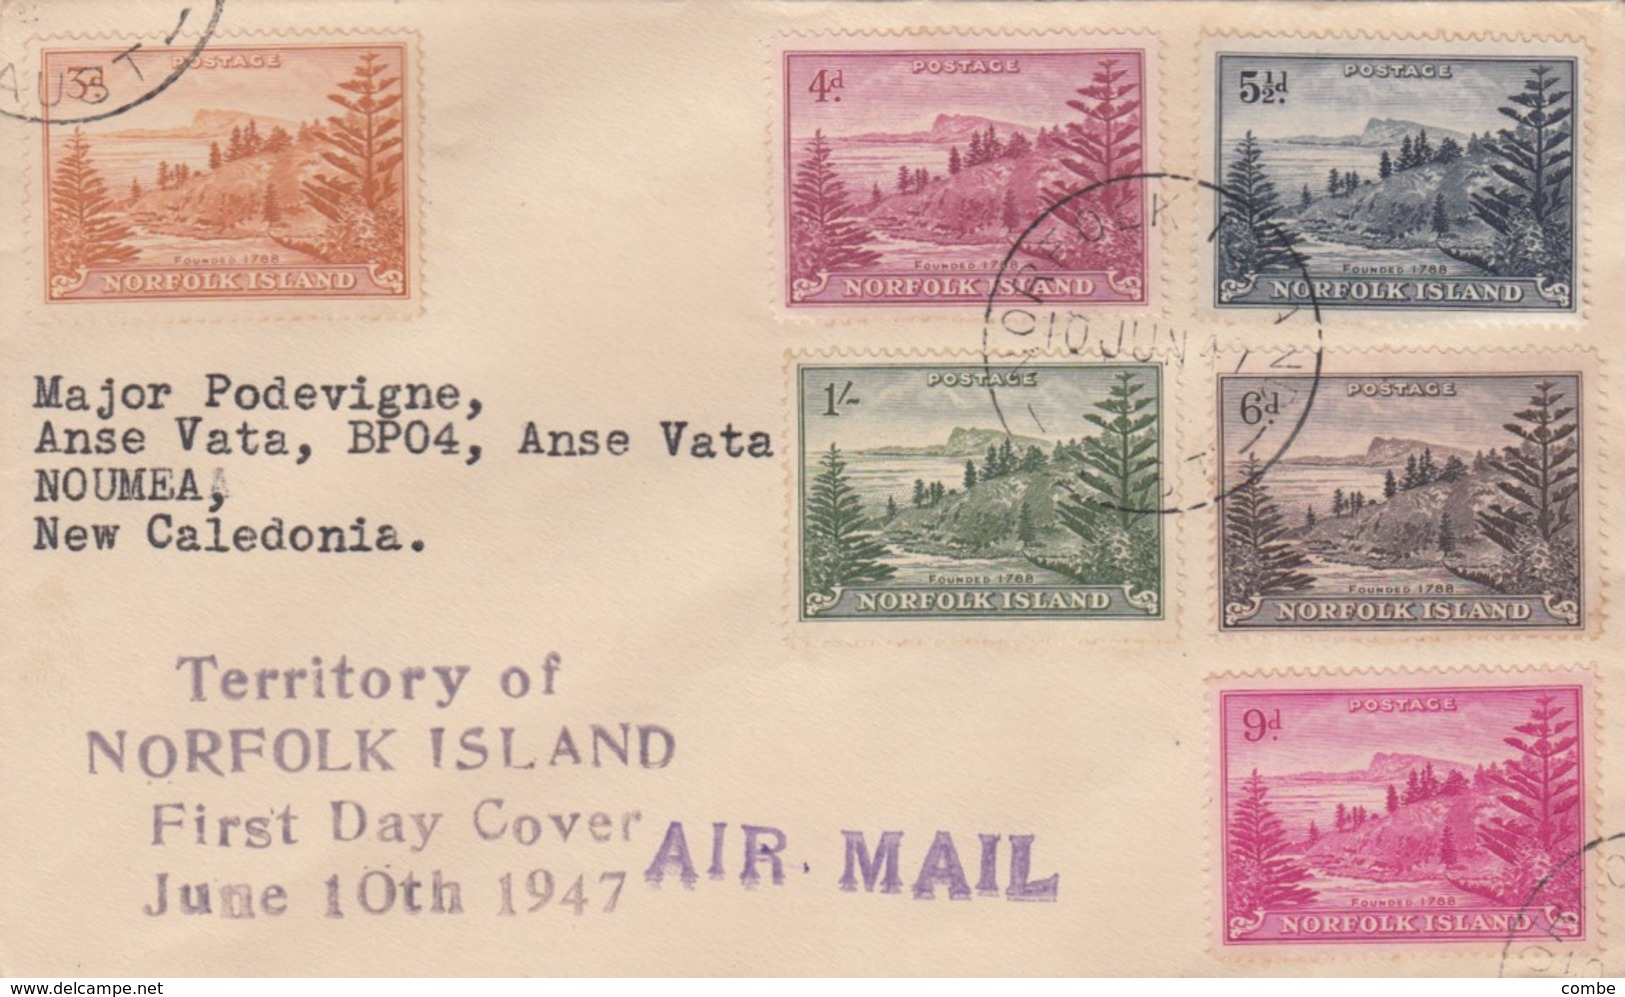 COVER. AIR MAIL. NORFOLK ISLAND. 10 JUN 47. FDC. TO NOUMEA NOUVELLE CALEDONIE - Isola Norfolk